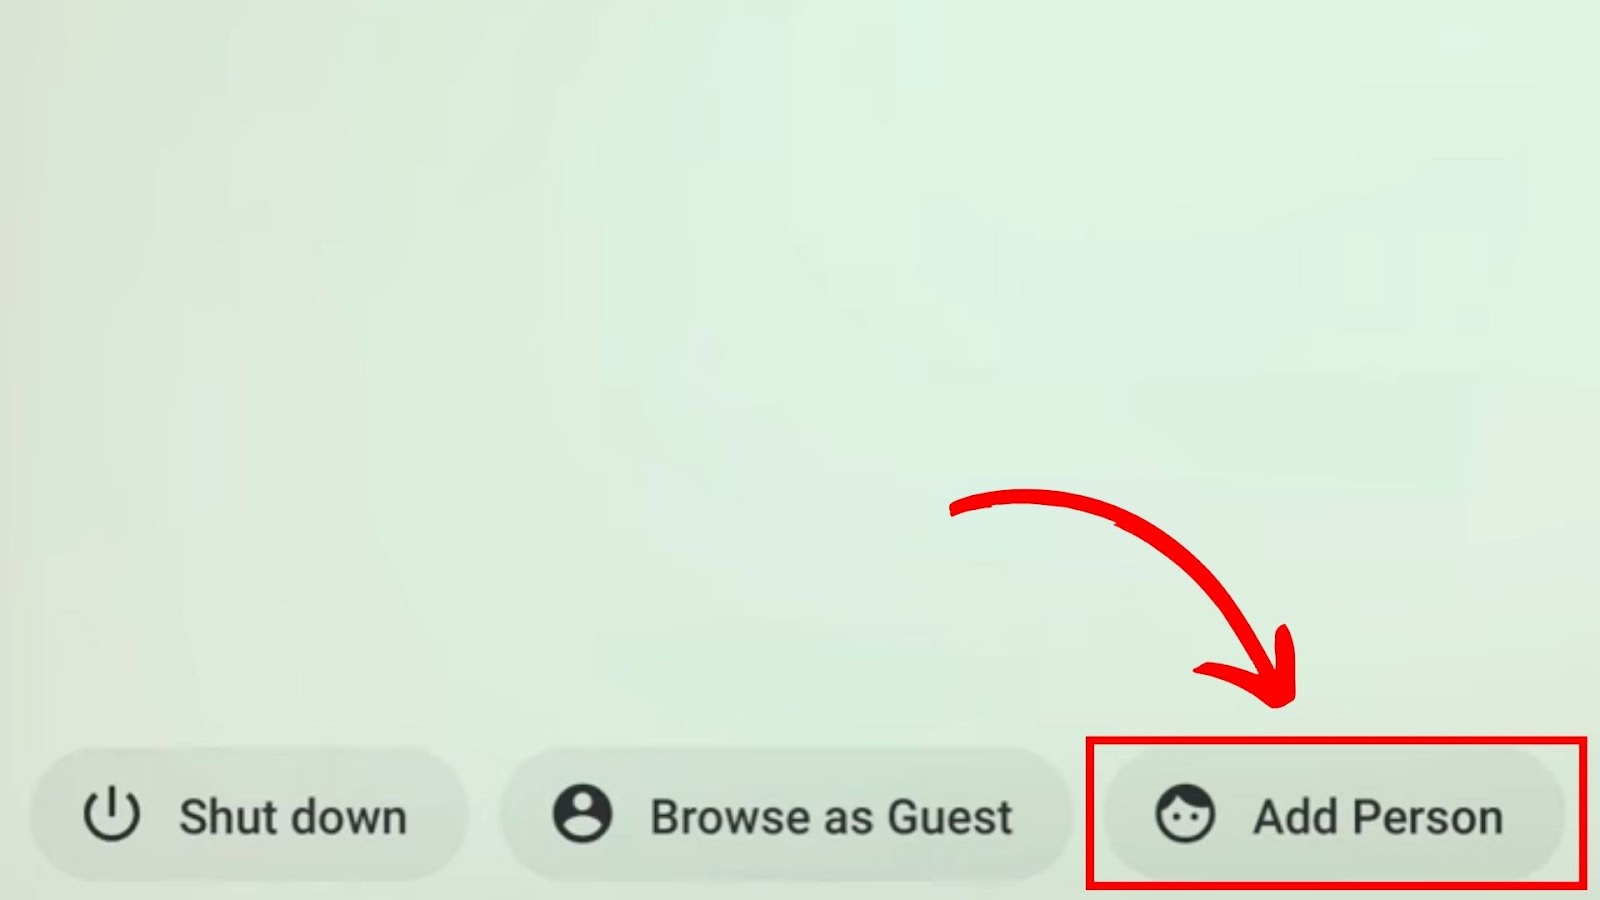 How to Add a Person on Chromebook